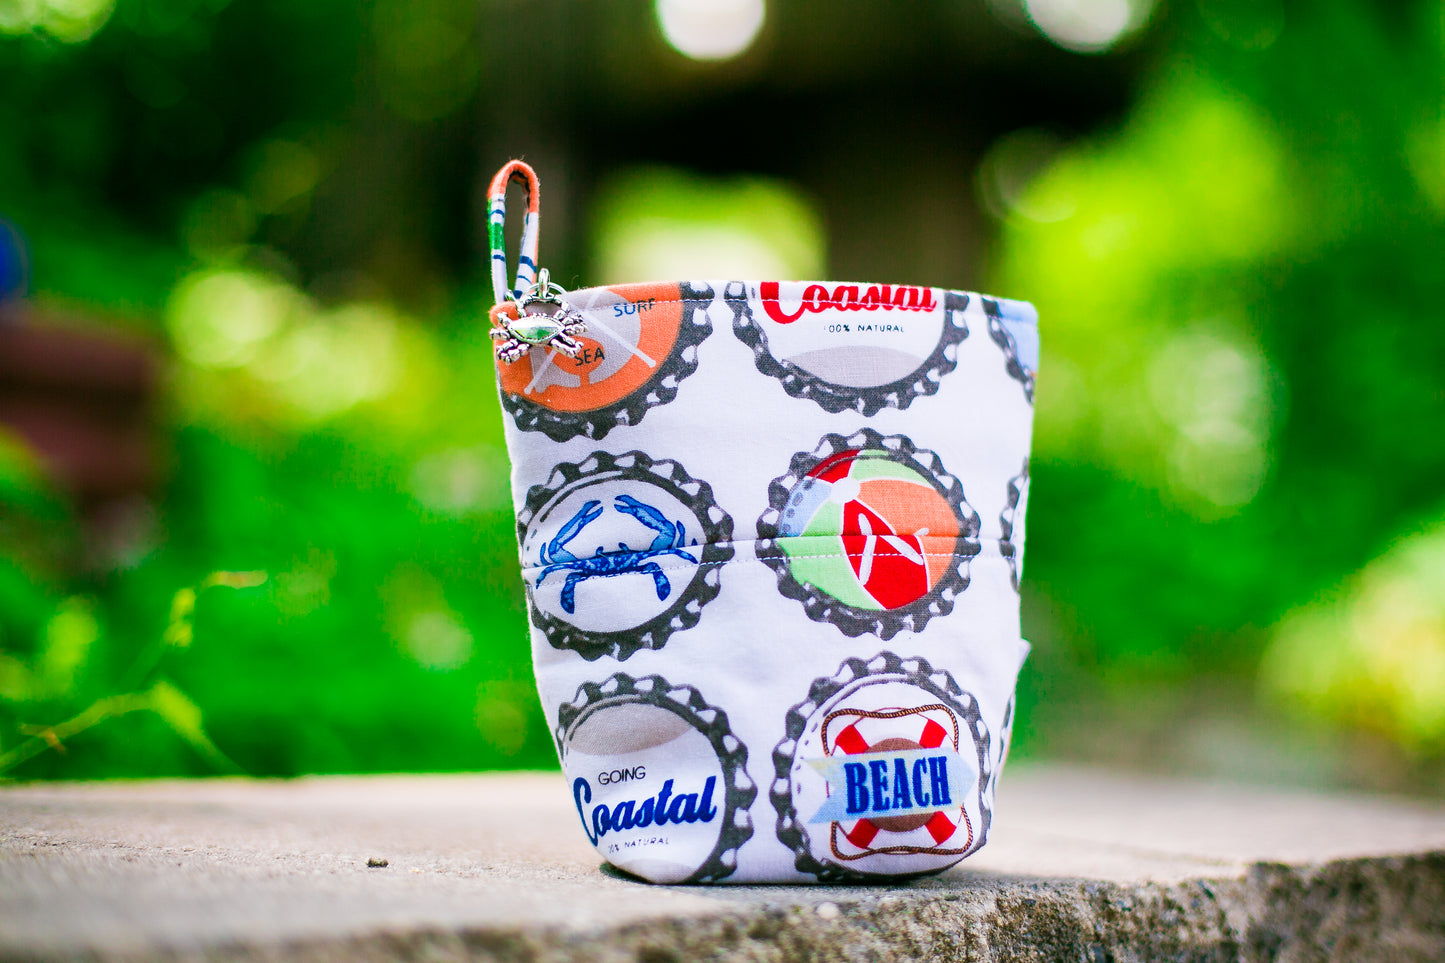 Fun Standard Treat and Pickup Bags Carry Pouch in Going Coastal Bottle Caps